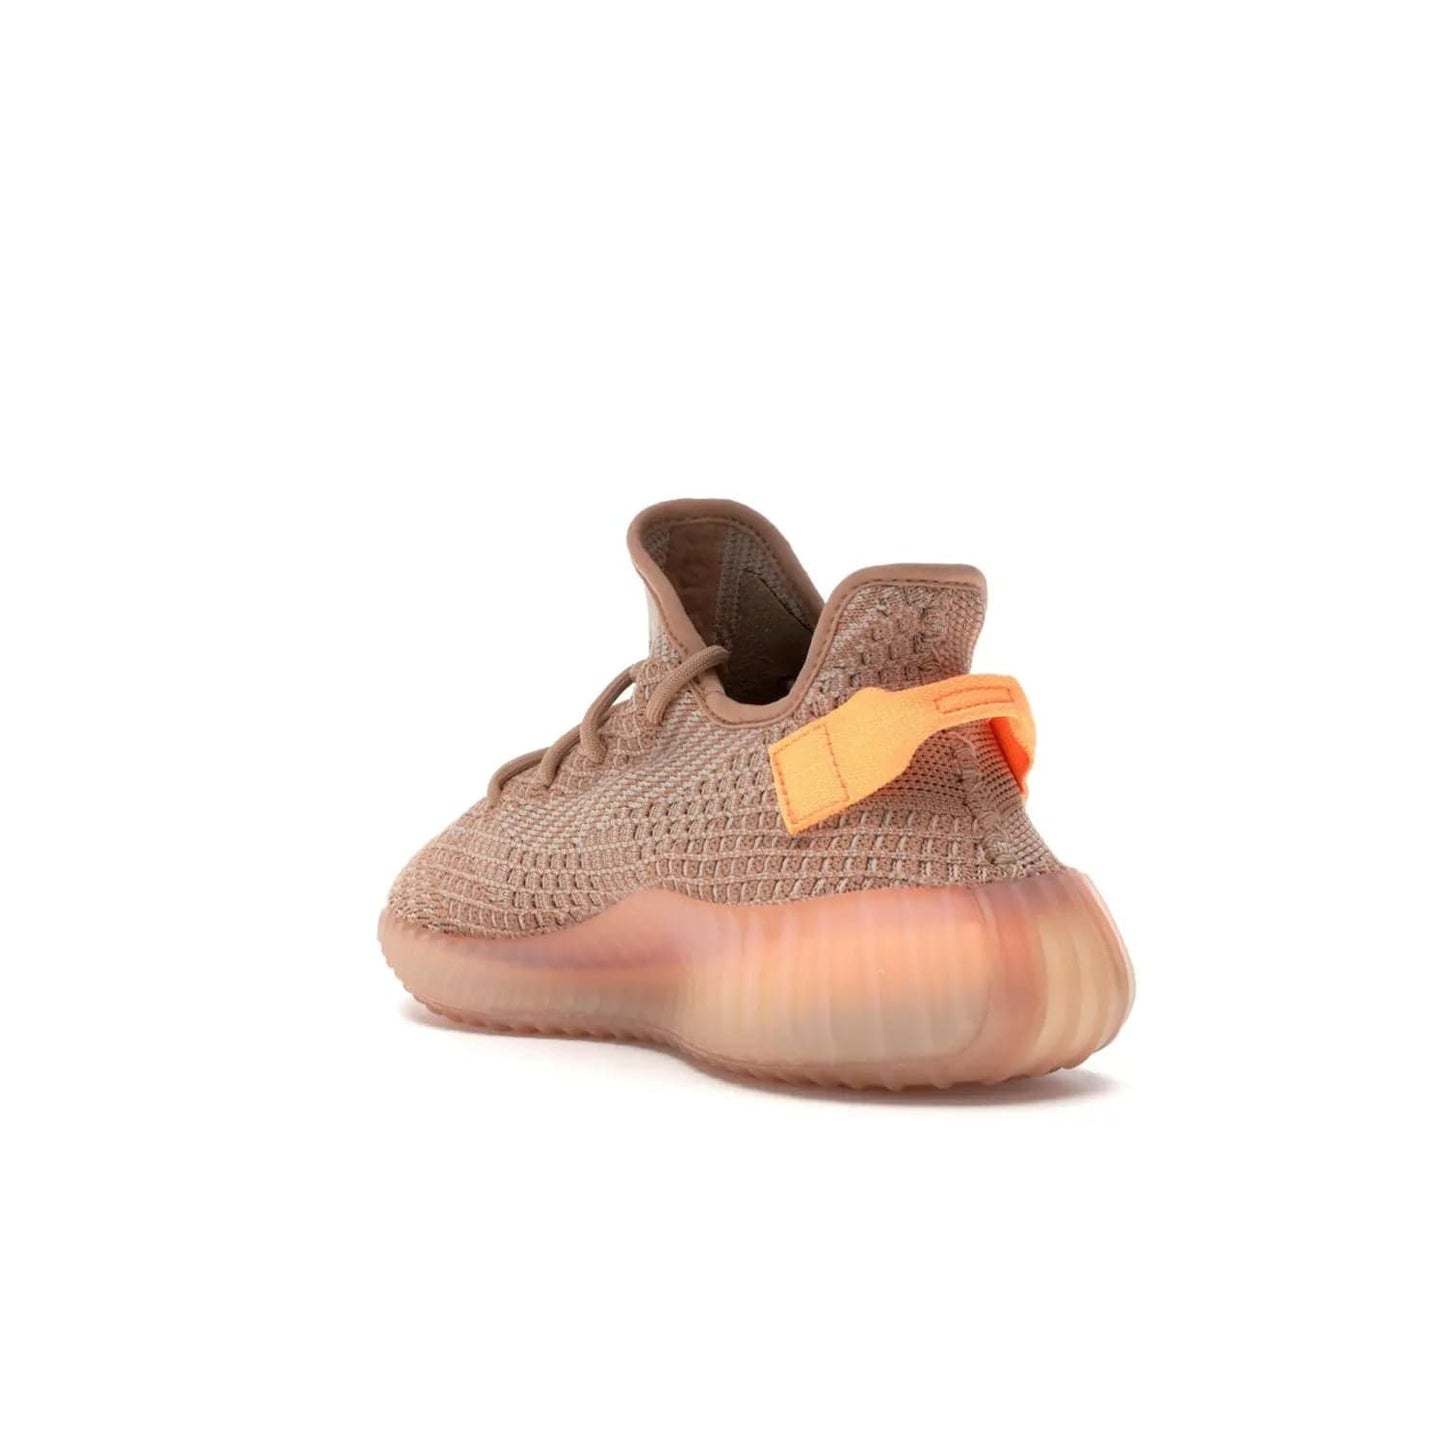 adidas Yeezy Boost 350 V2 Clay - Image 25 - Only at www.BallersClubKickz.com - The adidas Yeezy Boost 350 V2 Clay - style and swag in one shoe. Orange accents, clay midsole and sole. Get yours today!